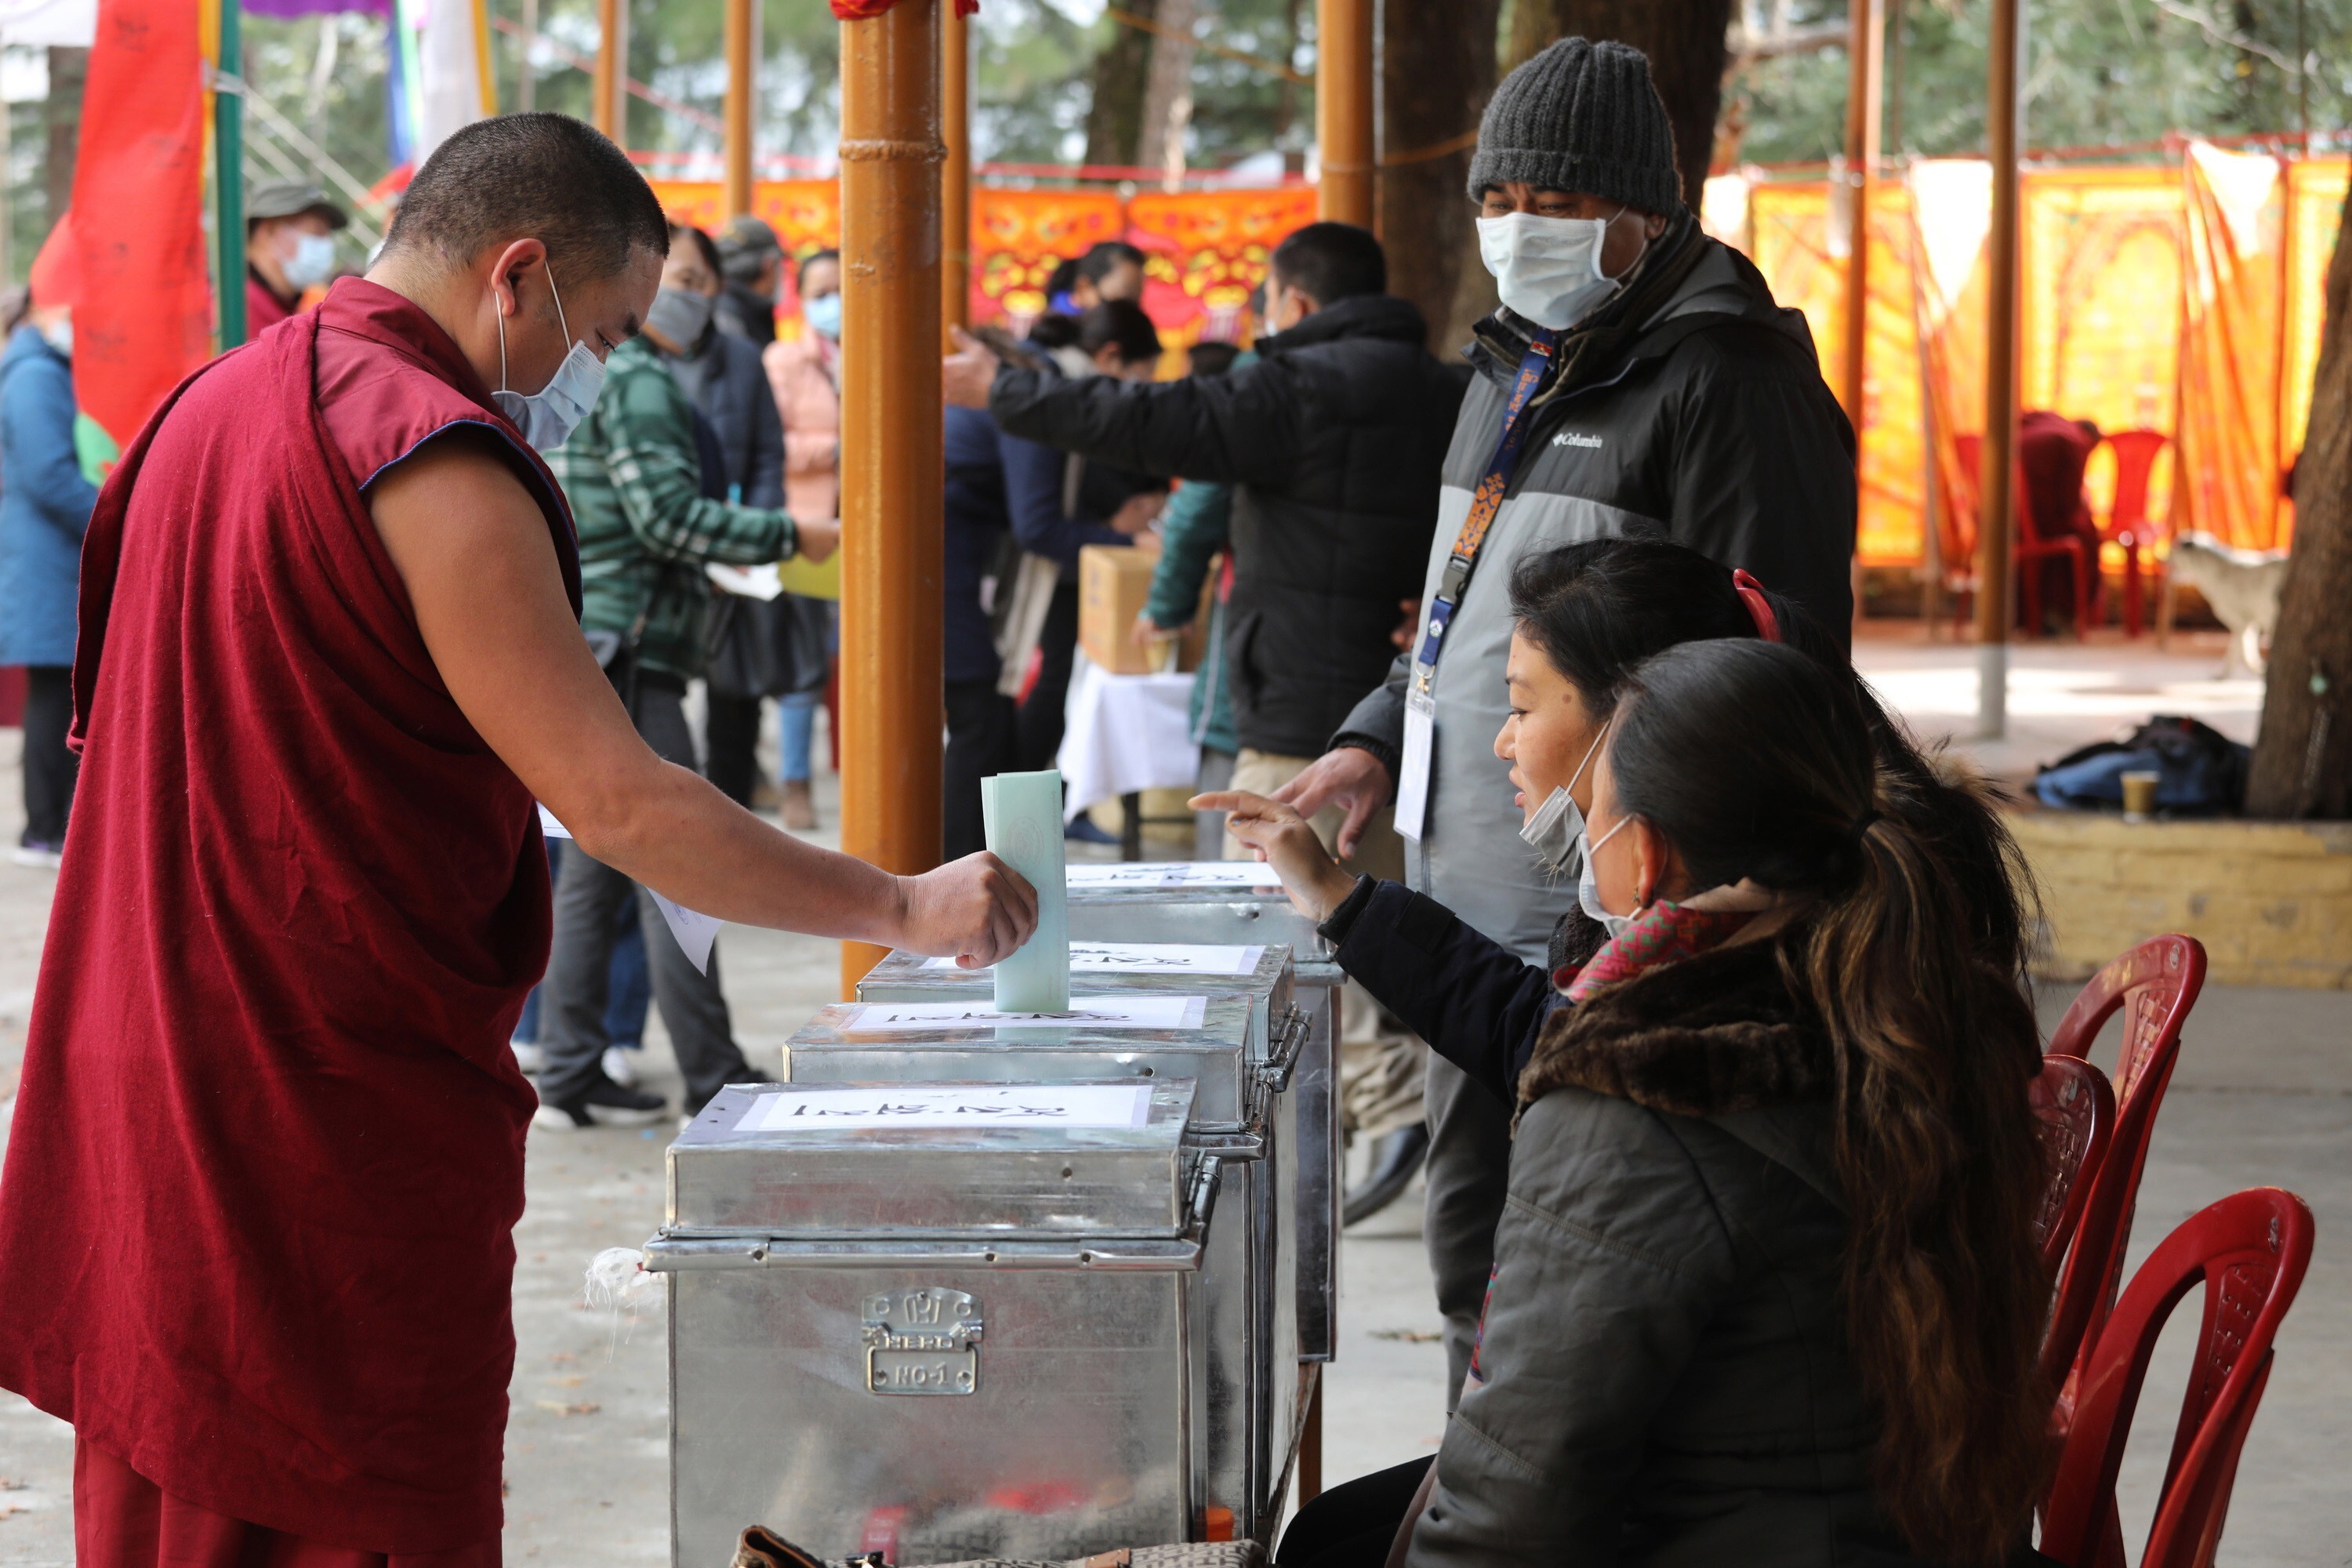 A Tibetan living in exile in India casts his vote for the Tibetan parliamentary election at a polling station in Dharamsala on January 3. Photo: EPA